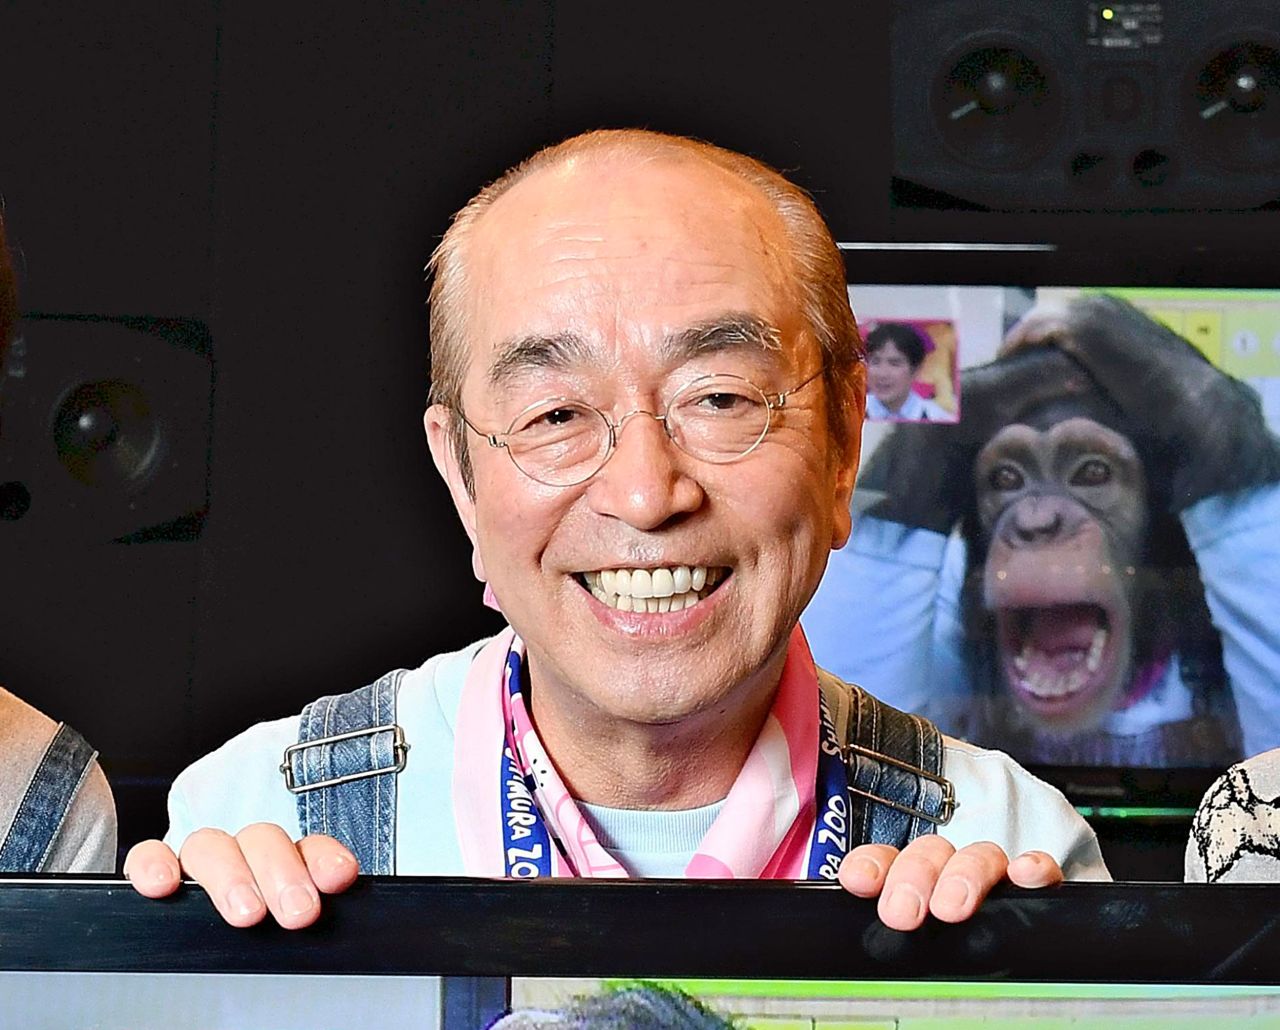 Famed Japanese comedian <a href="https://www.cnn.com/2020/03/30/entertainment/ken-shimura-coronavirus-scli-intl/index.html" target="_blank">Ken Shimura</a> died March 29 after contracting the novel coronavirus, his representatives said. Shimura, 70, has been described as "Japan's Robin Williams," with the country's television networks heavily covering his death.